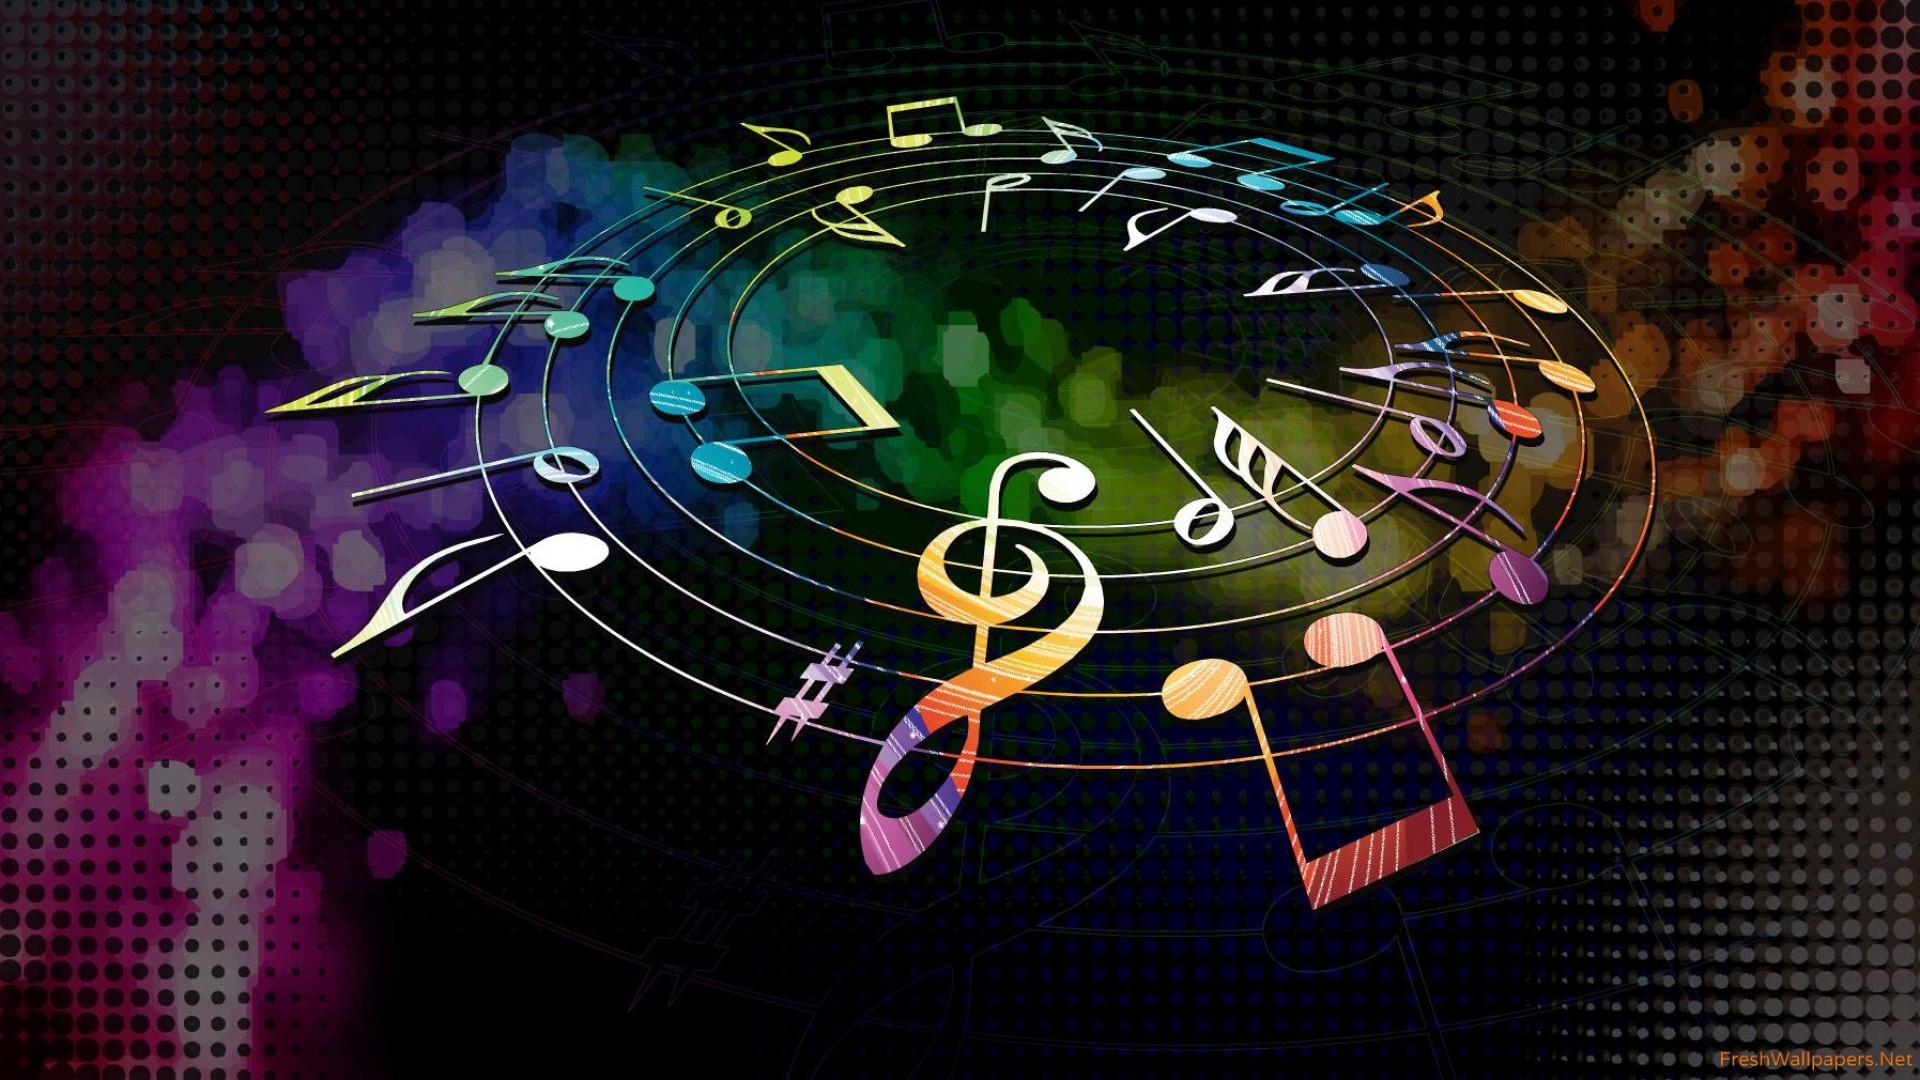 Colorful musical notes wallpaper